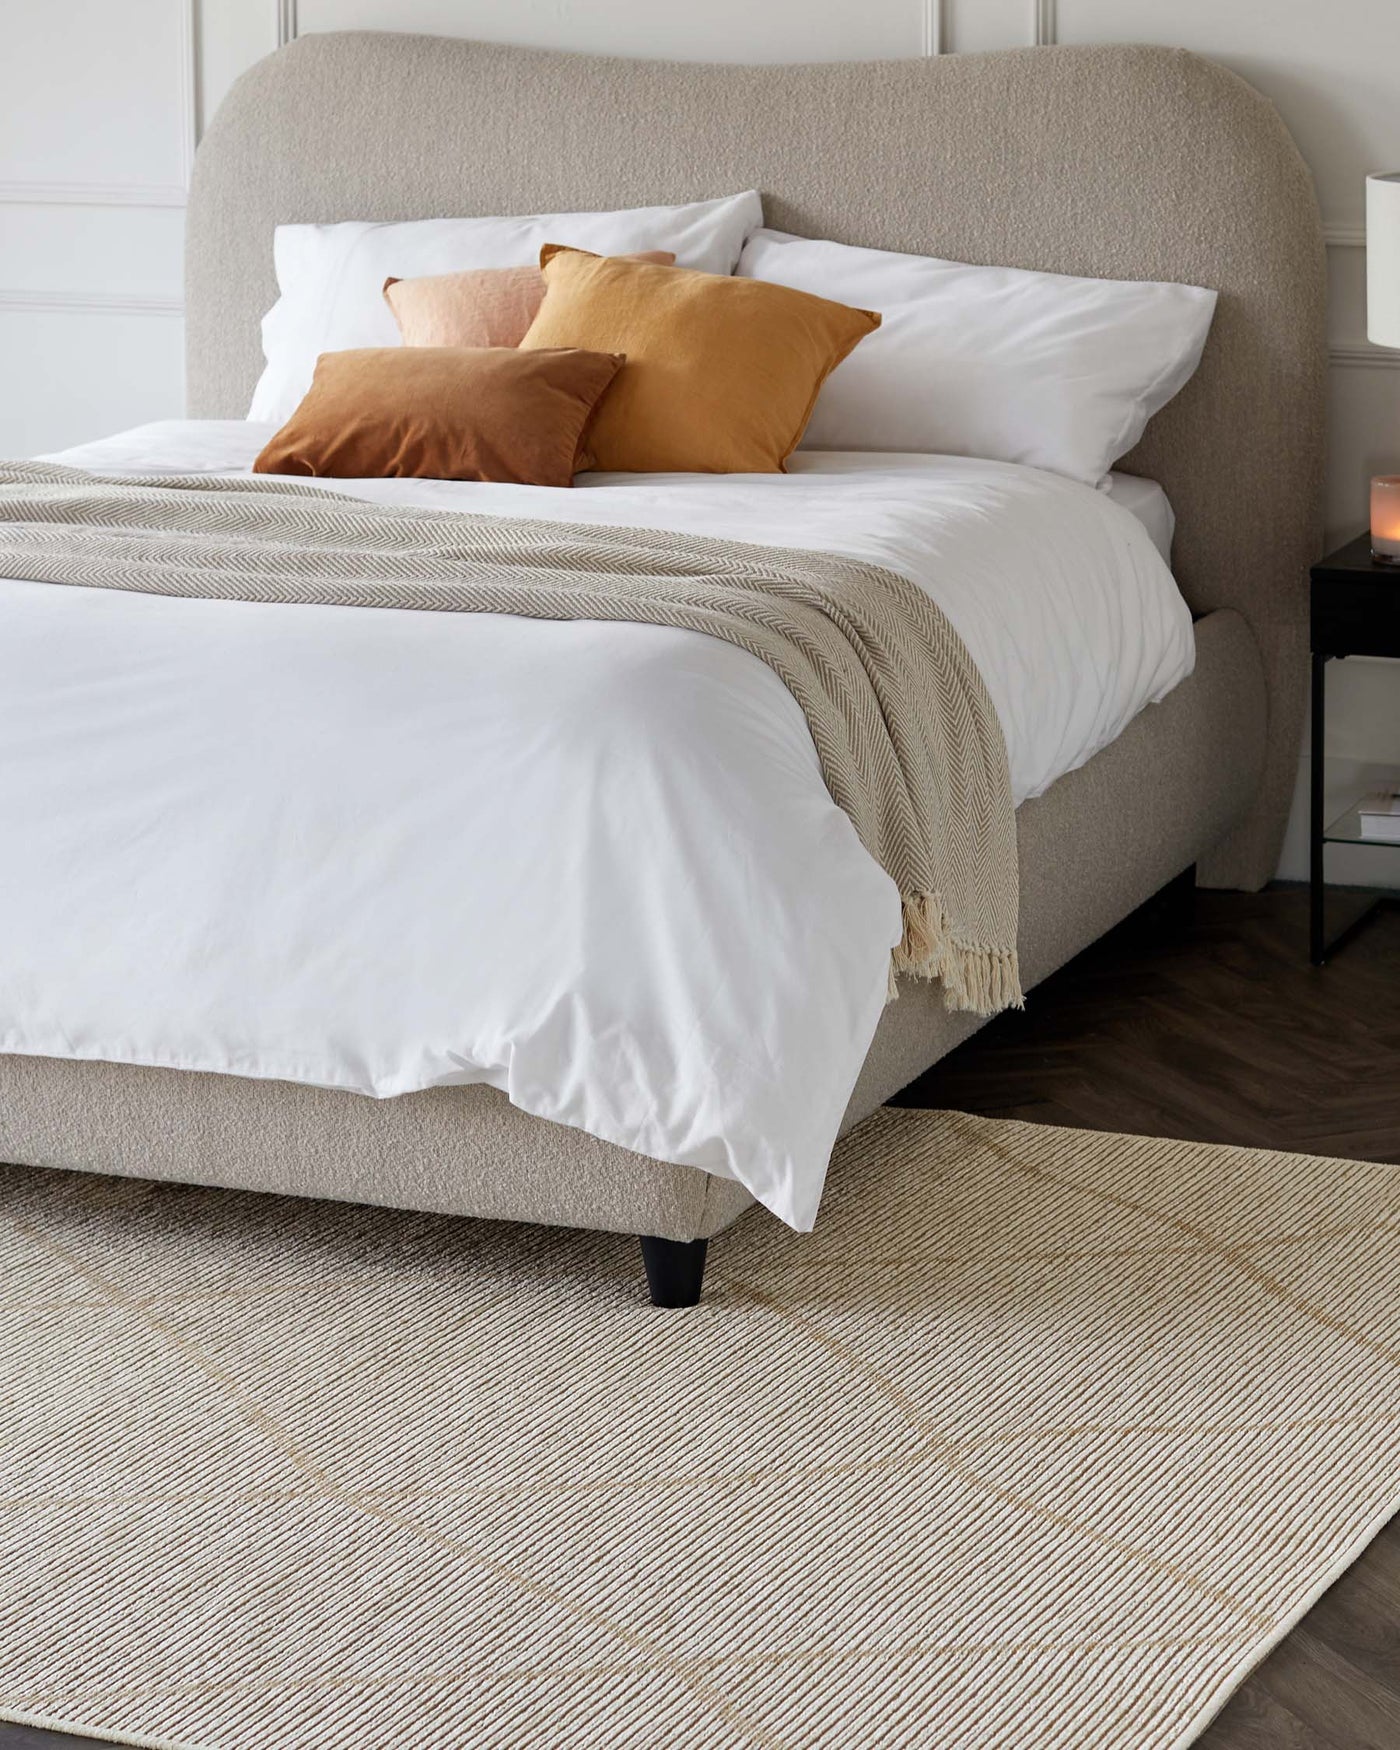 A contemporary upholstered bed with a curved headboard in beige, dressed with white and golden-toned bedding, paired with a textured off-white throw at the foot. A small dark bedside table with a lamp and a beige textured area rug complement the scene.